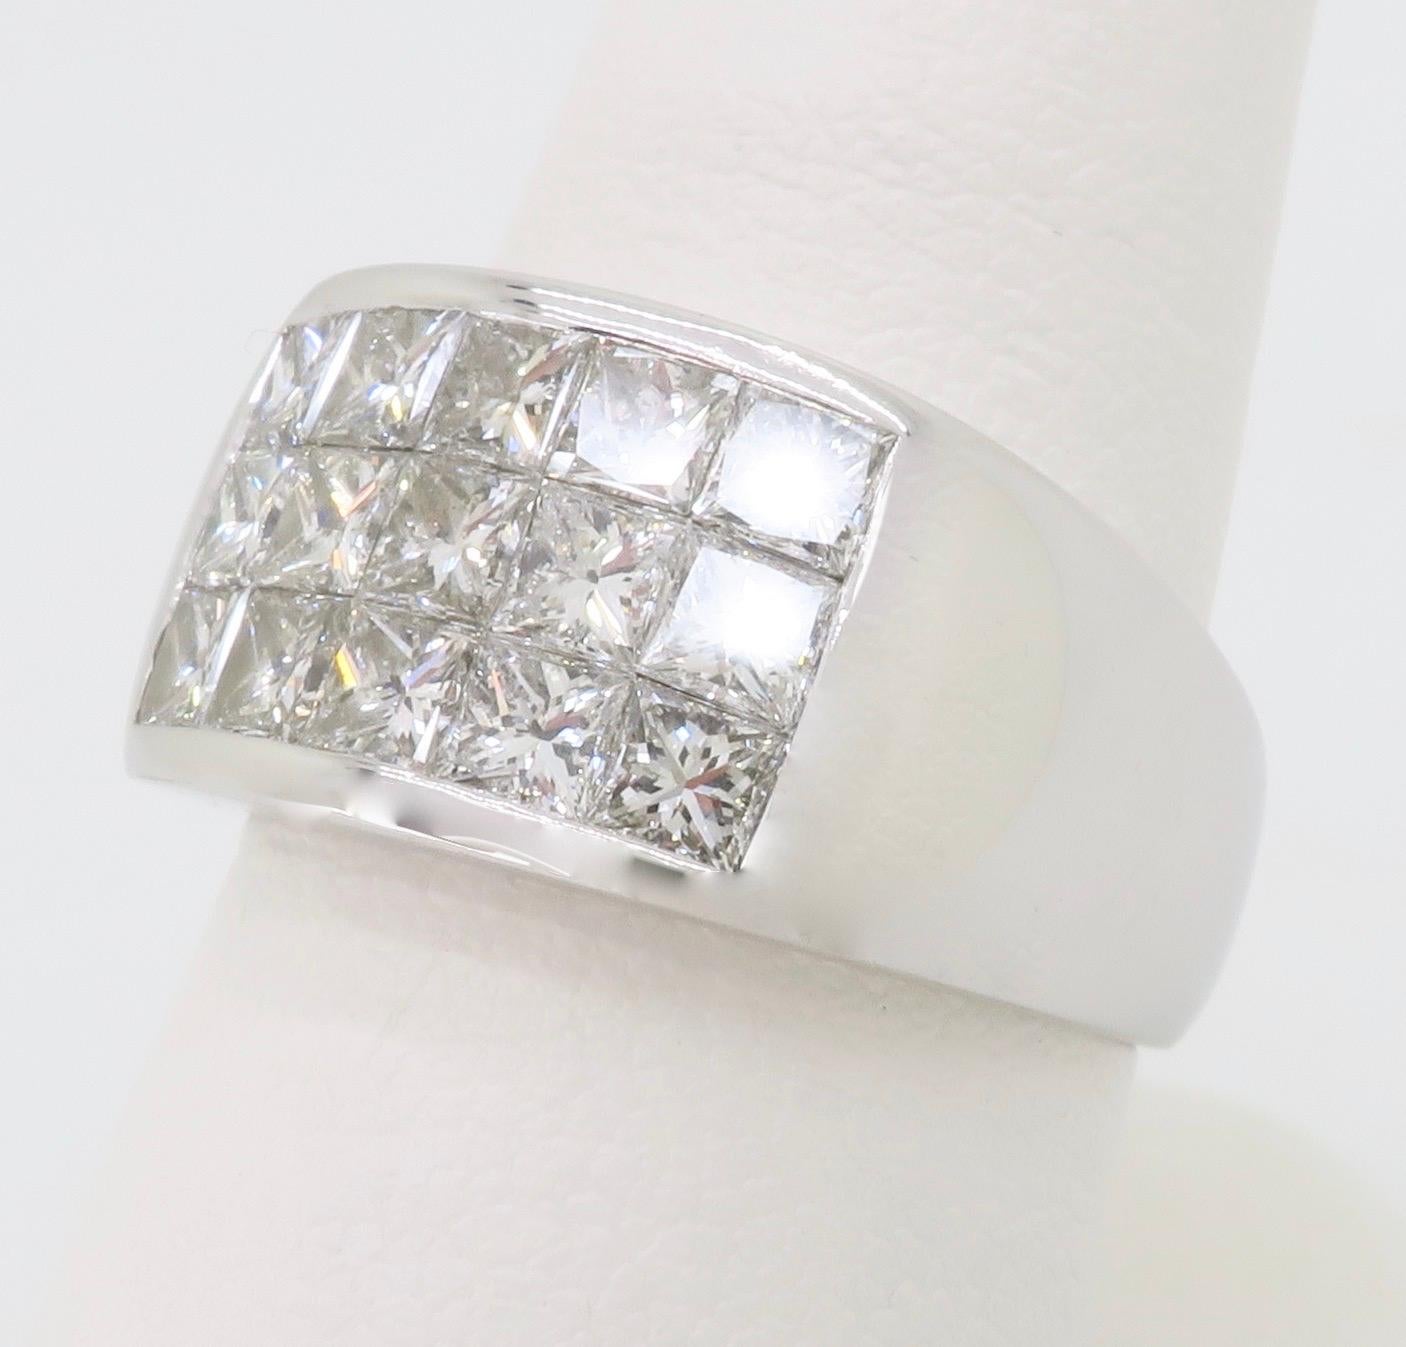 Invisible Set Princess Cut Diamond Ring Made in 18k White Gold In New Condition For Sale In Webster, NY